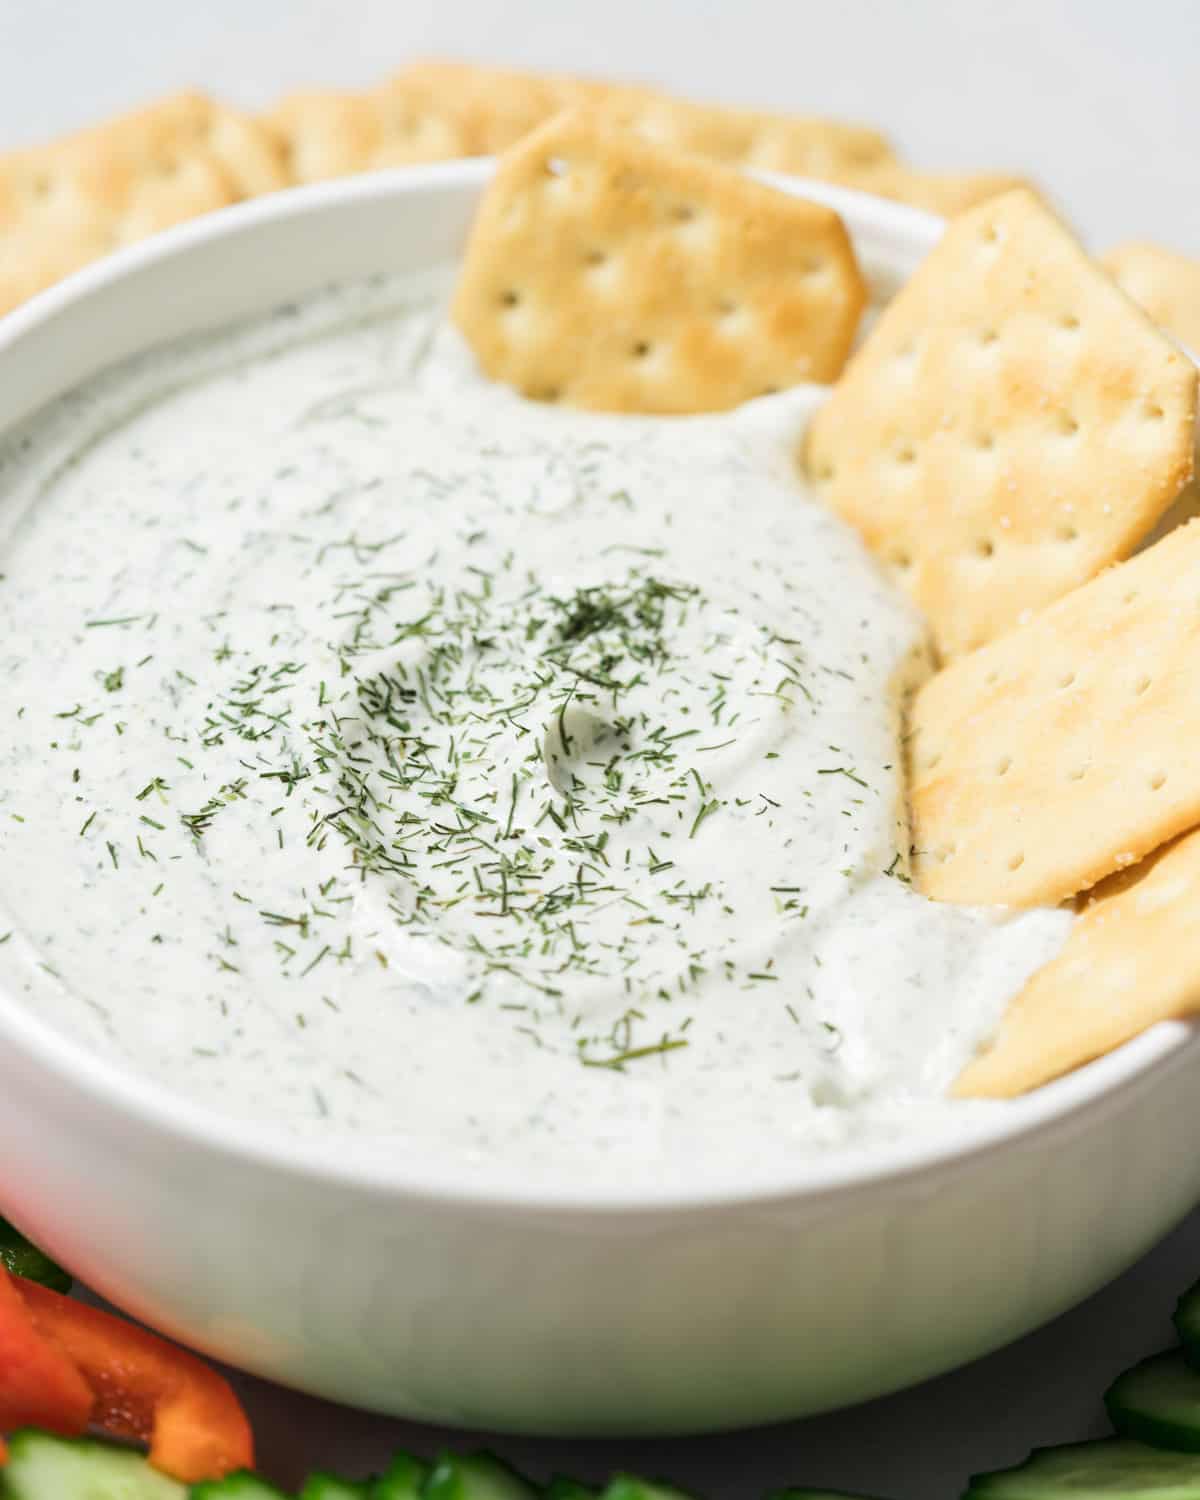 Cottage cheese dip with crackers dipped in it.